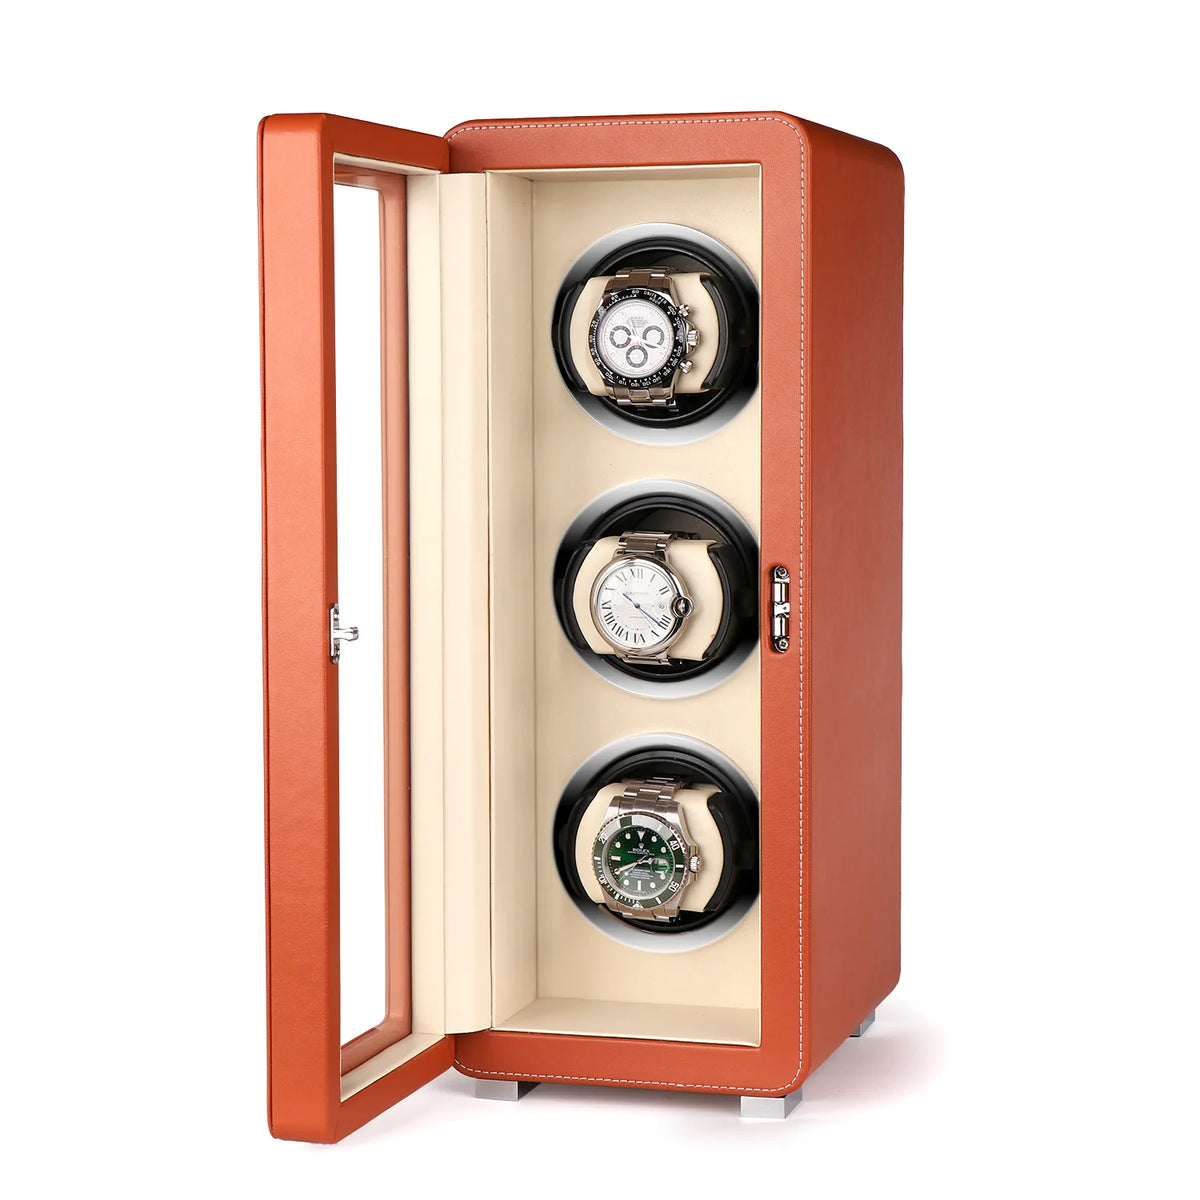 Triple Watch Winder - Efficiently Maintain Your Timepiece Collection